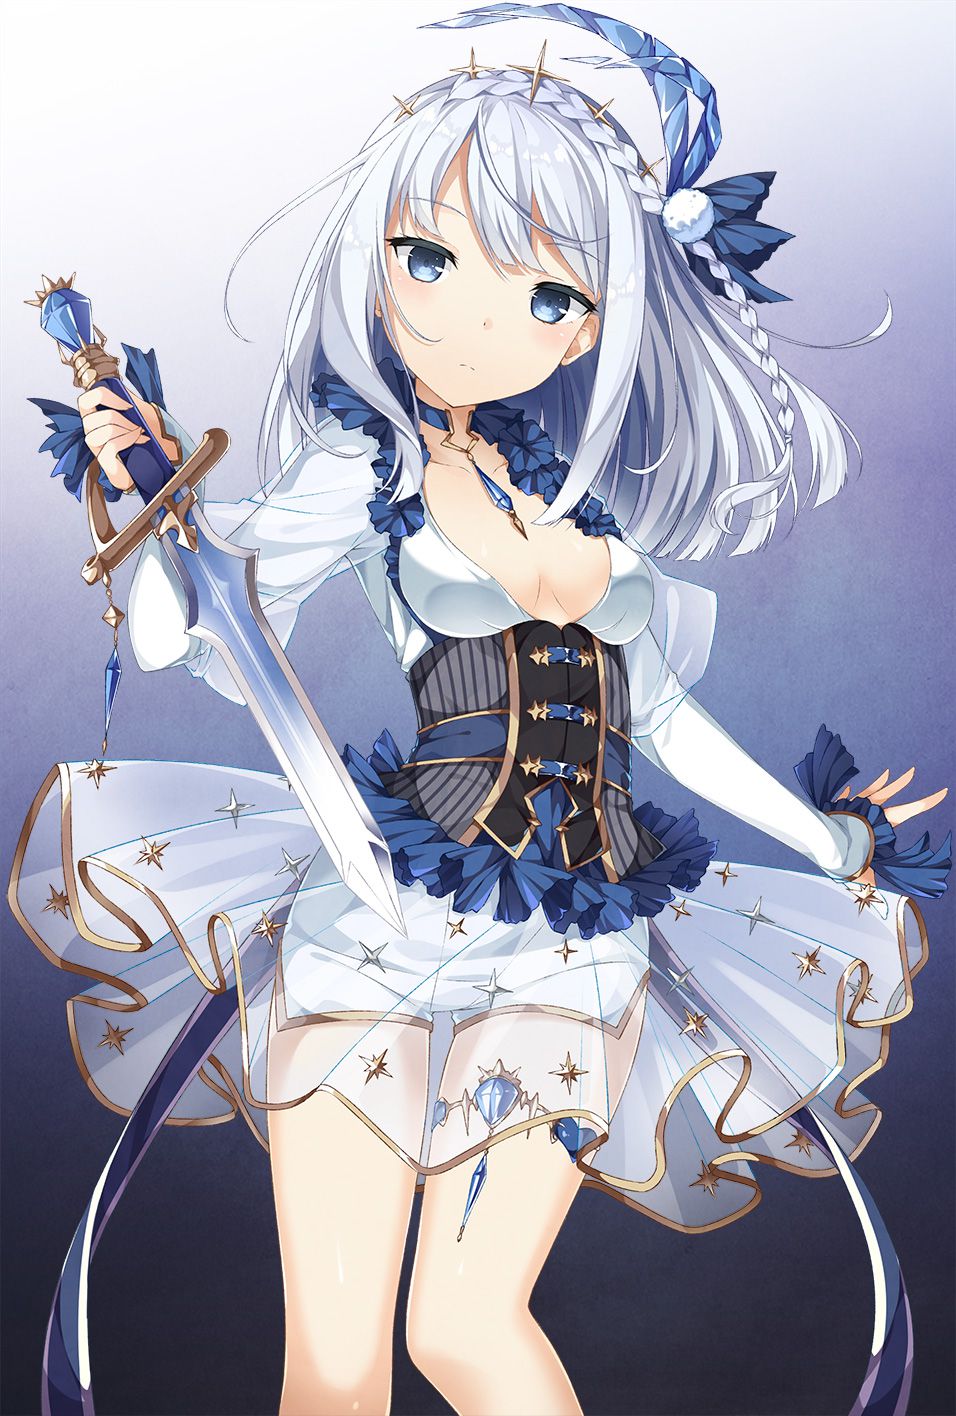 Secondary image of a silver-haired girl that 4 50 photos [Ero/non-erotic] 26